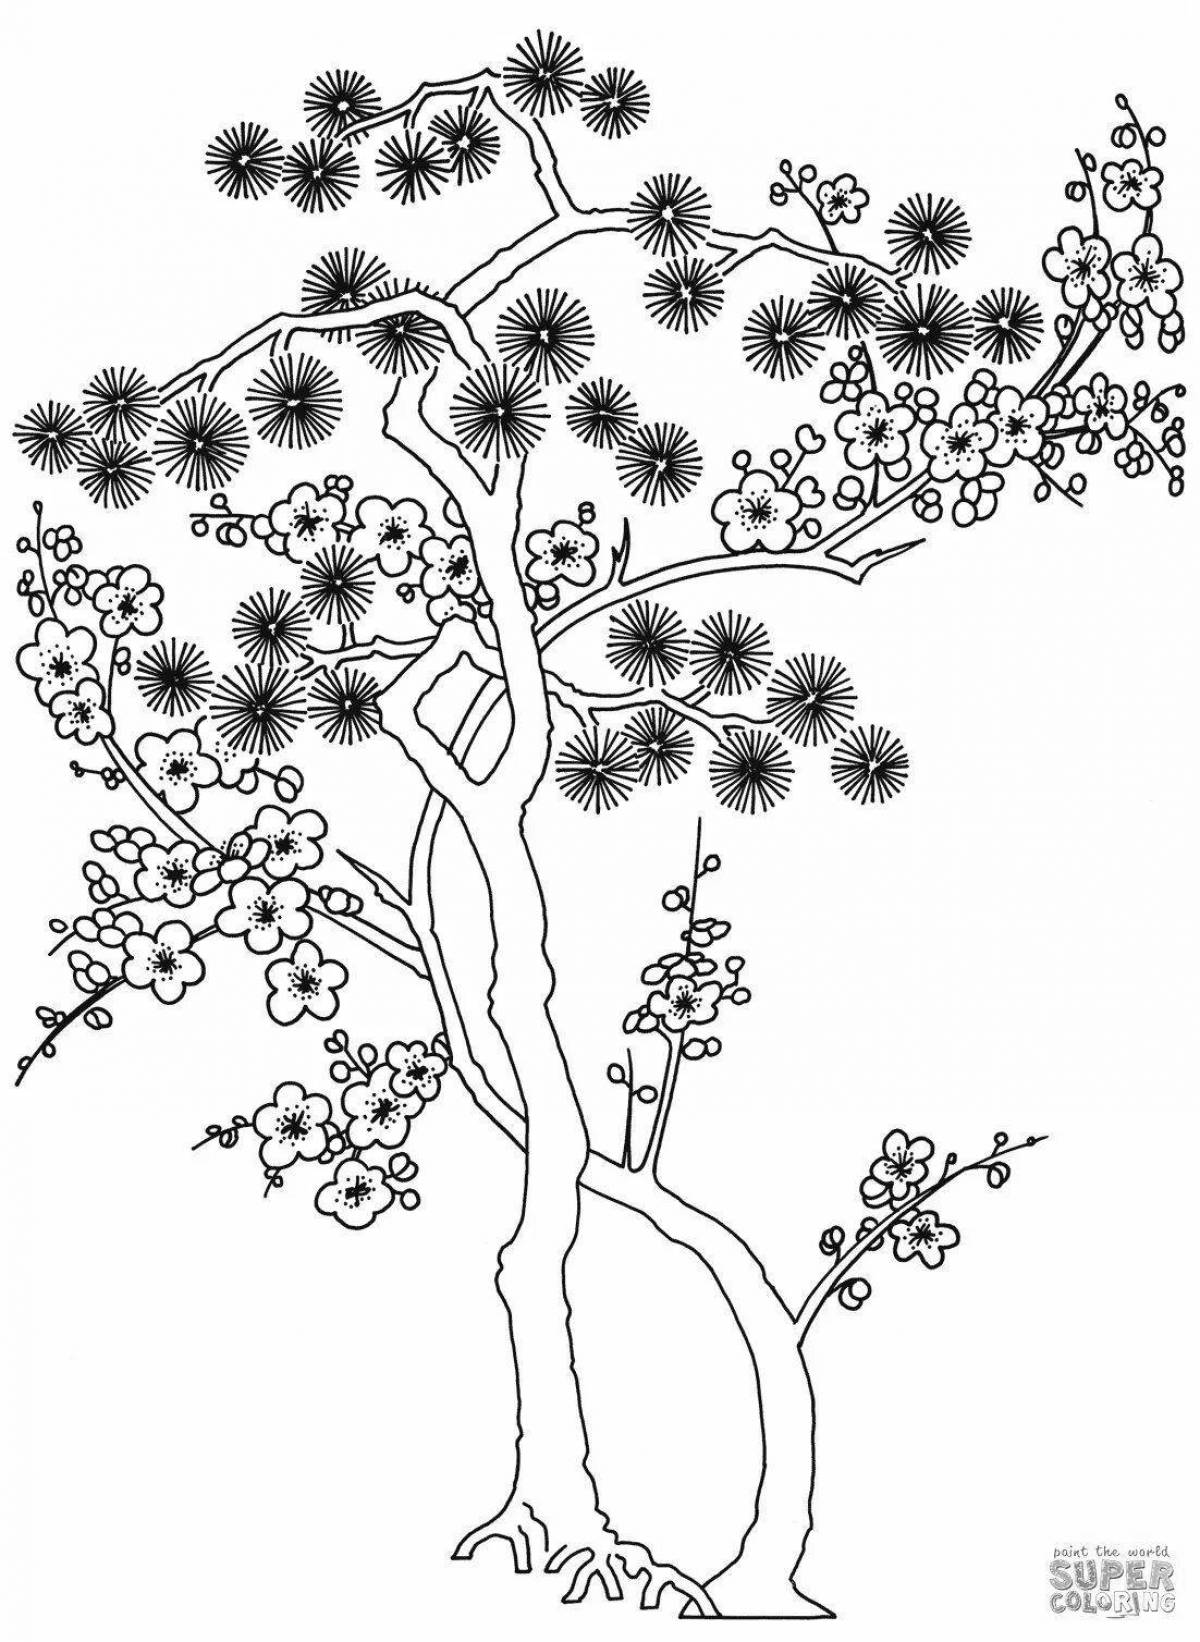 Japanese blossom tree coloring page